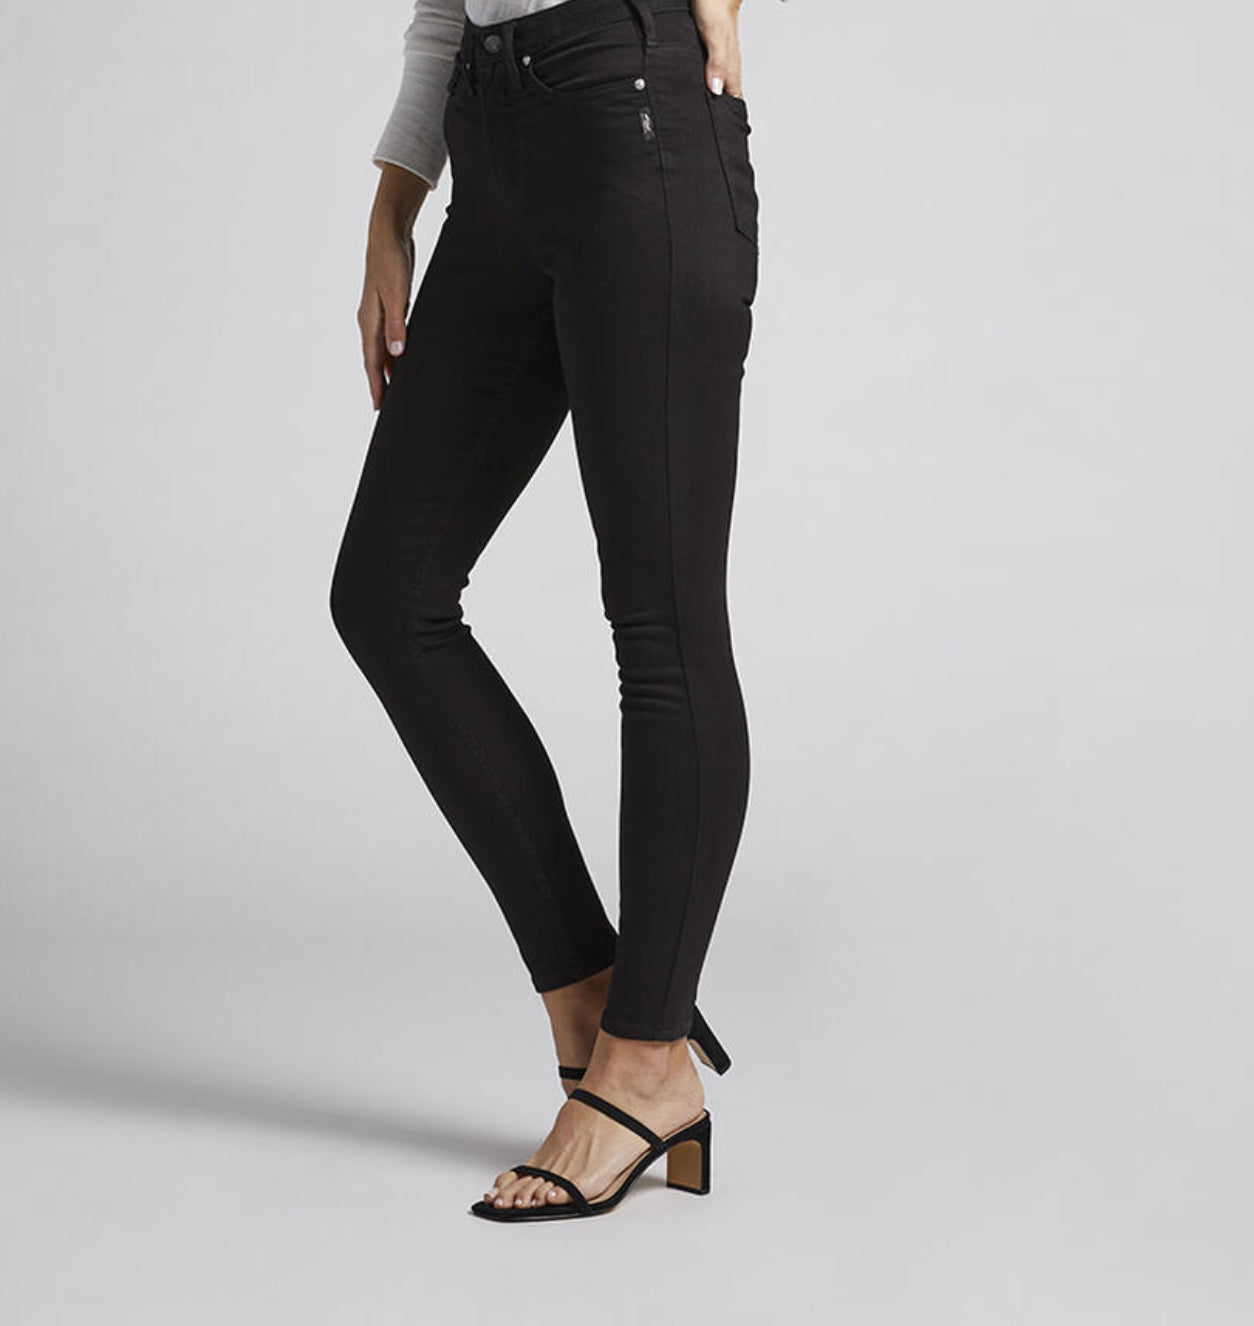 Silver Jeans - Infinite Fit High - Black